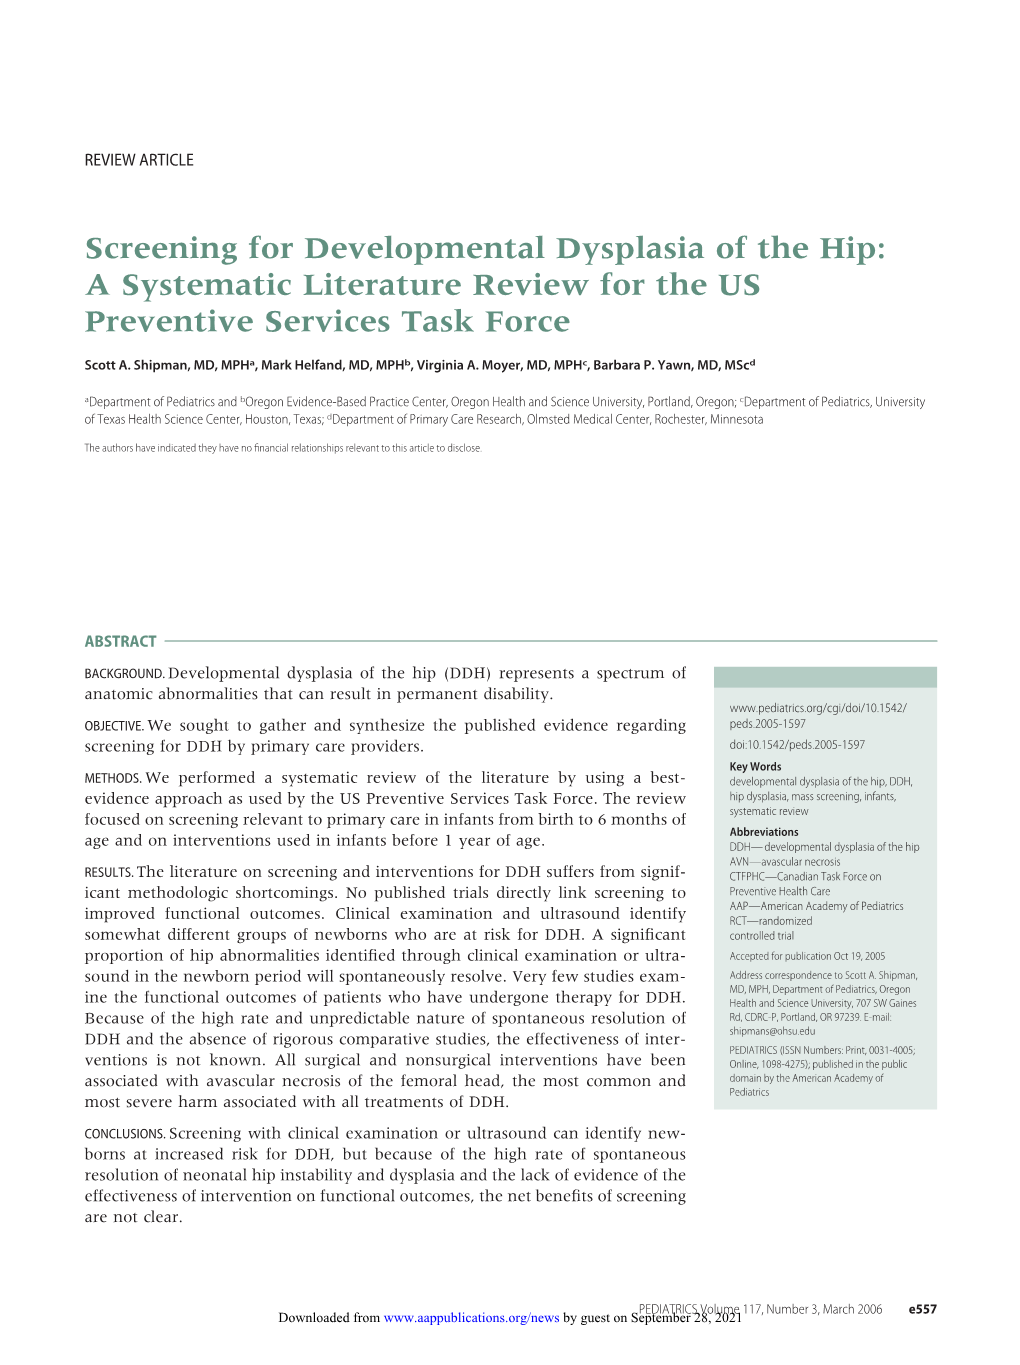 Screening for Developmental Dysplasia of the Hip: a Systematic Literature Review for the US Preventive Services Task Force